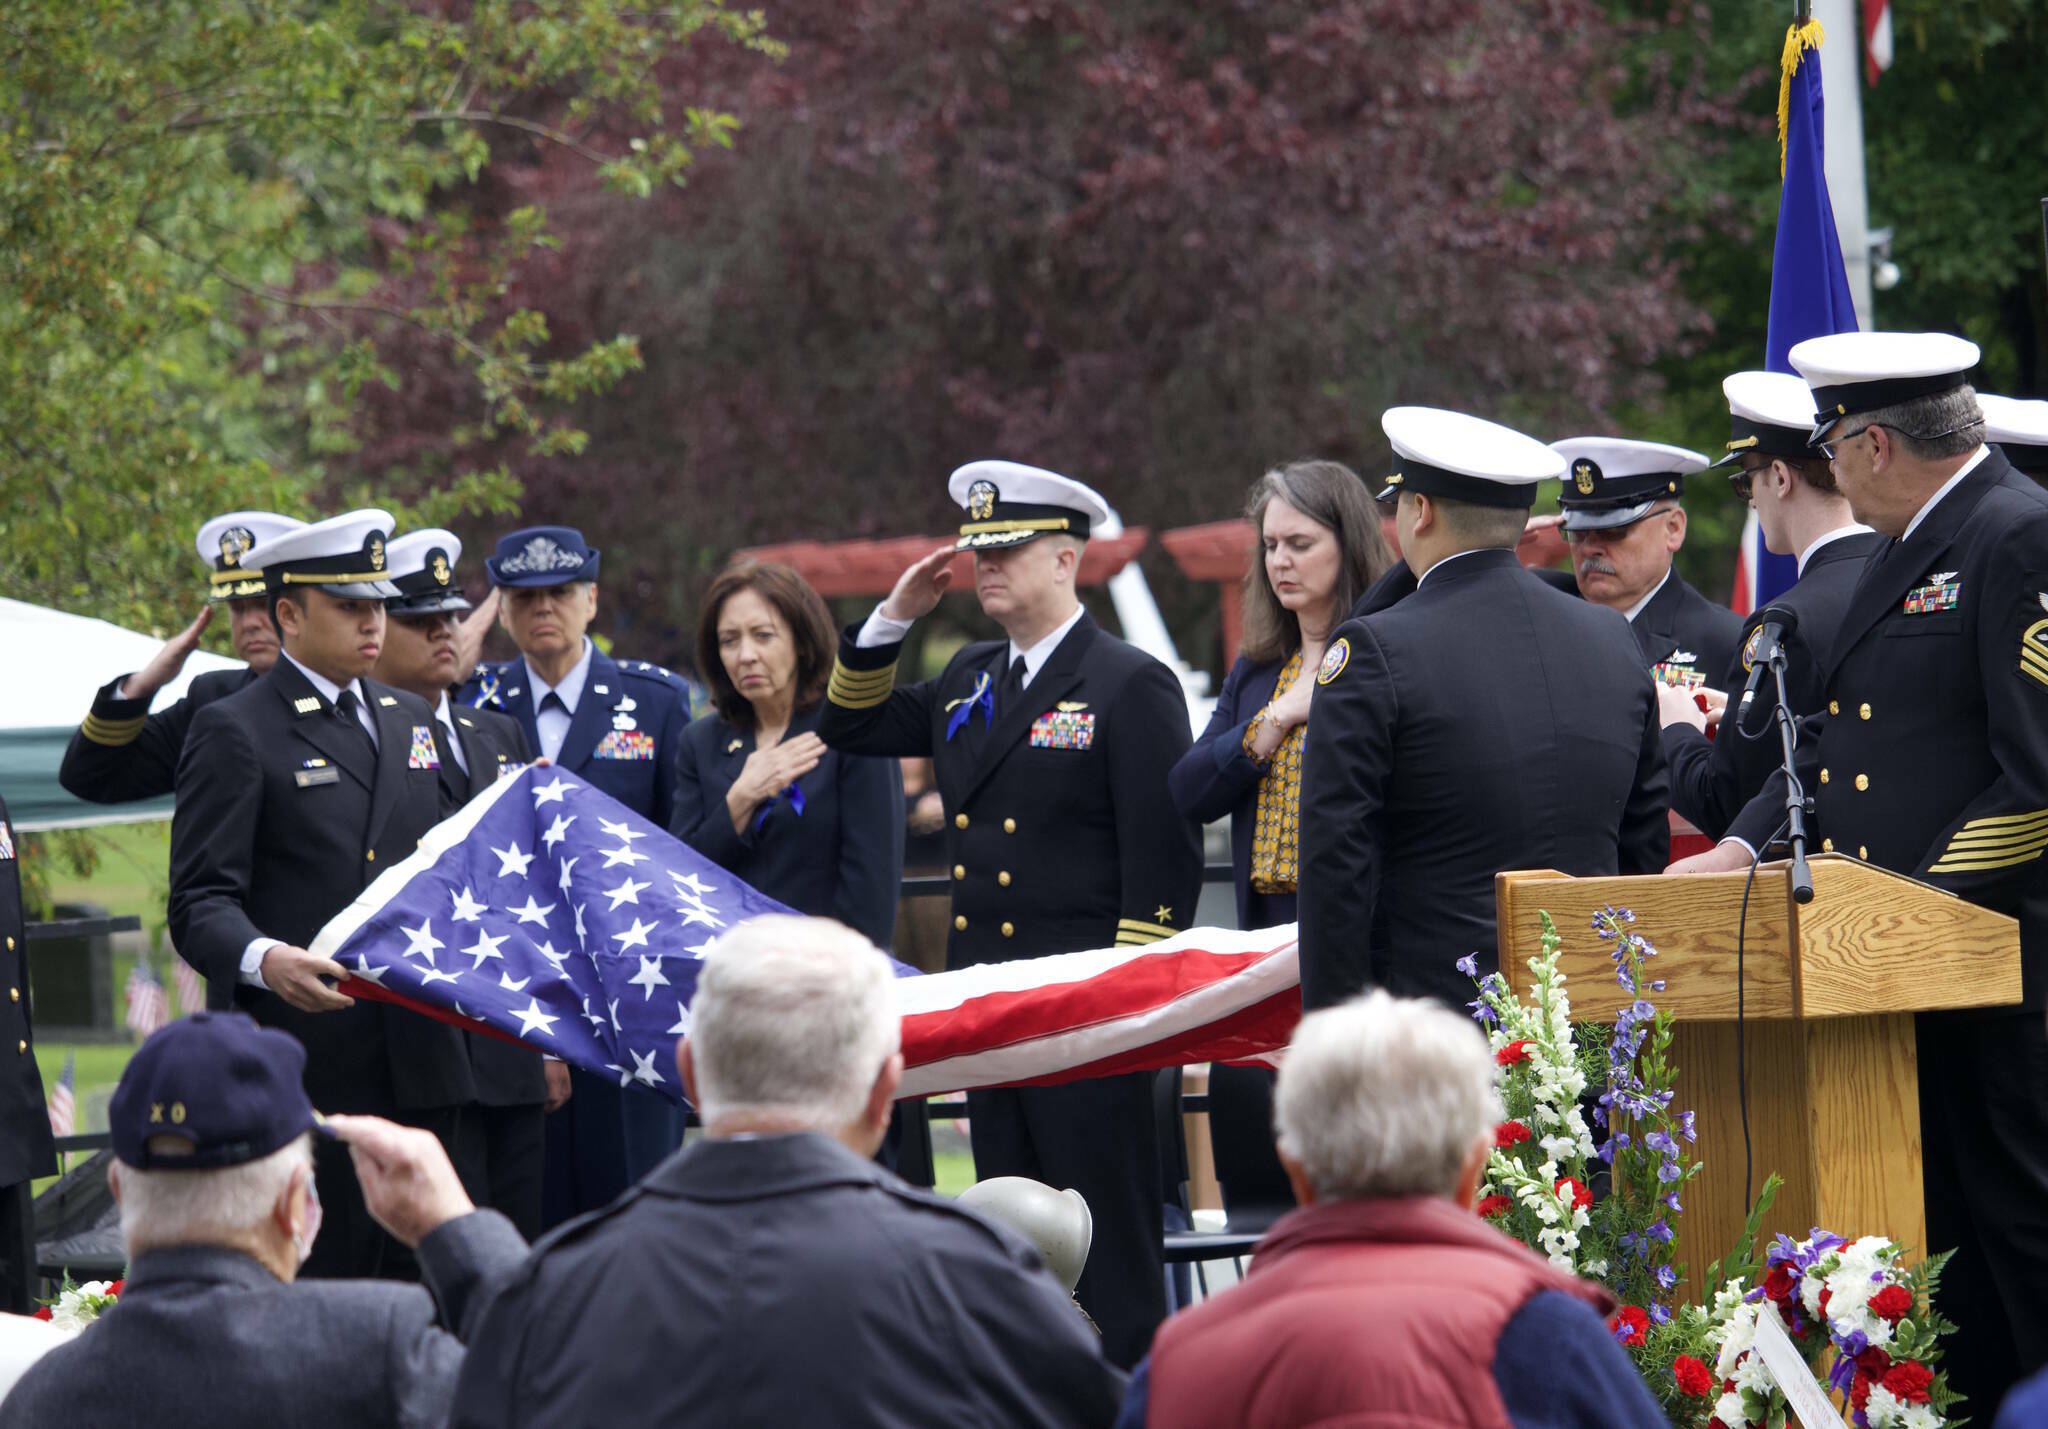 File photo by Rachel Rosen/Whidbey News-Times
Oak Harbor High School Naval Junior Reserve Officers Training Corps folds a flag at the 2022 Memorial Day Service of Remembrance at Maple Leaf Cemetery in Oak Harbor.